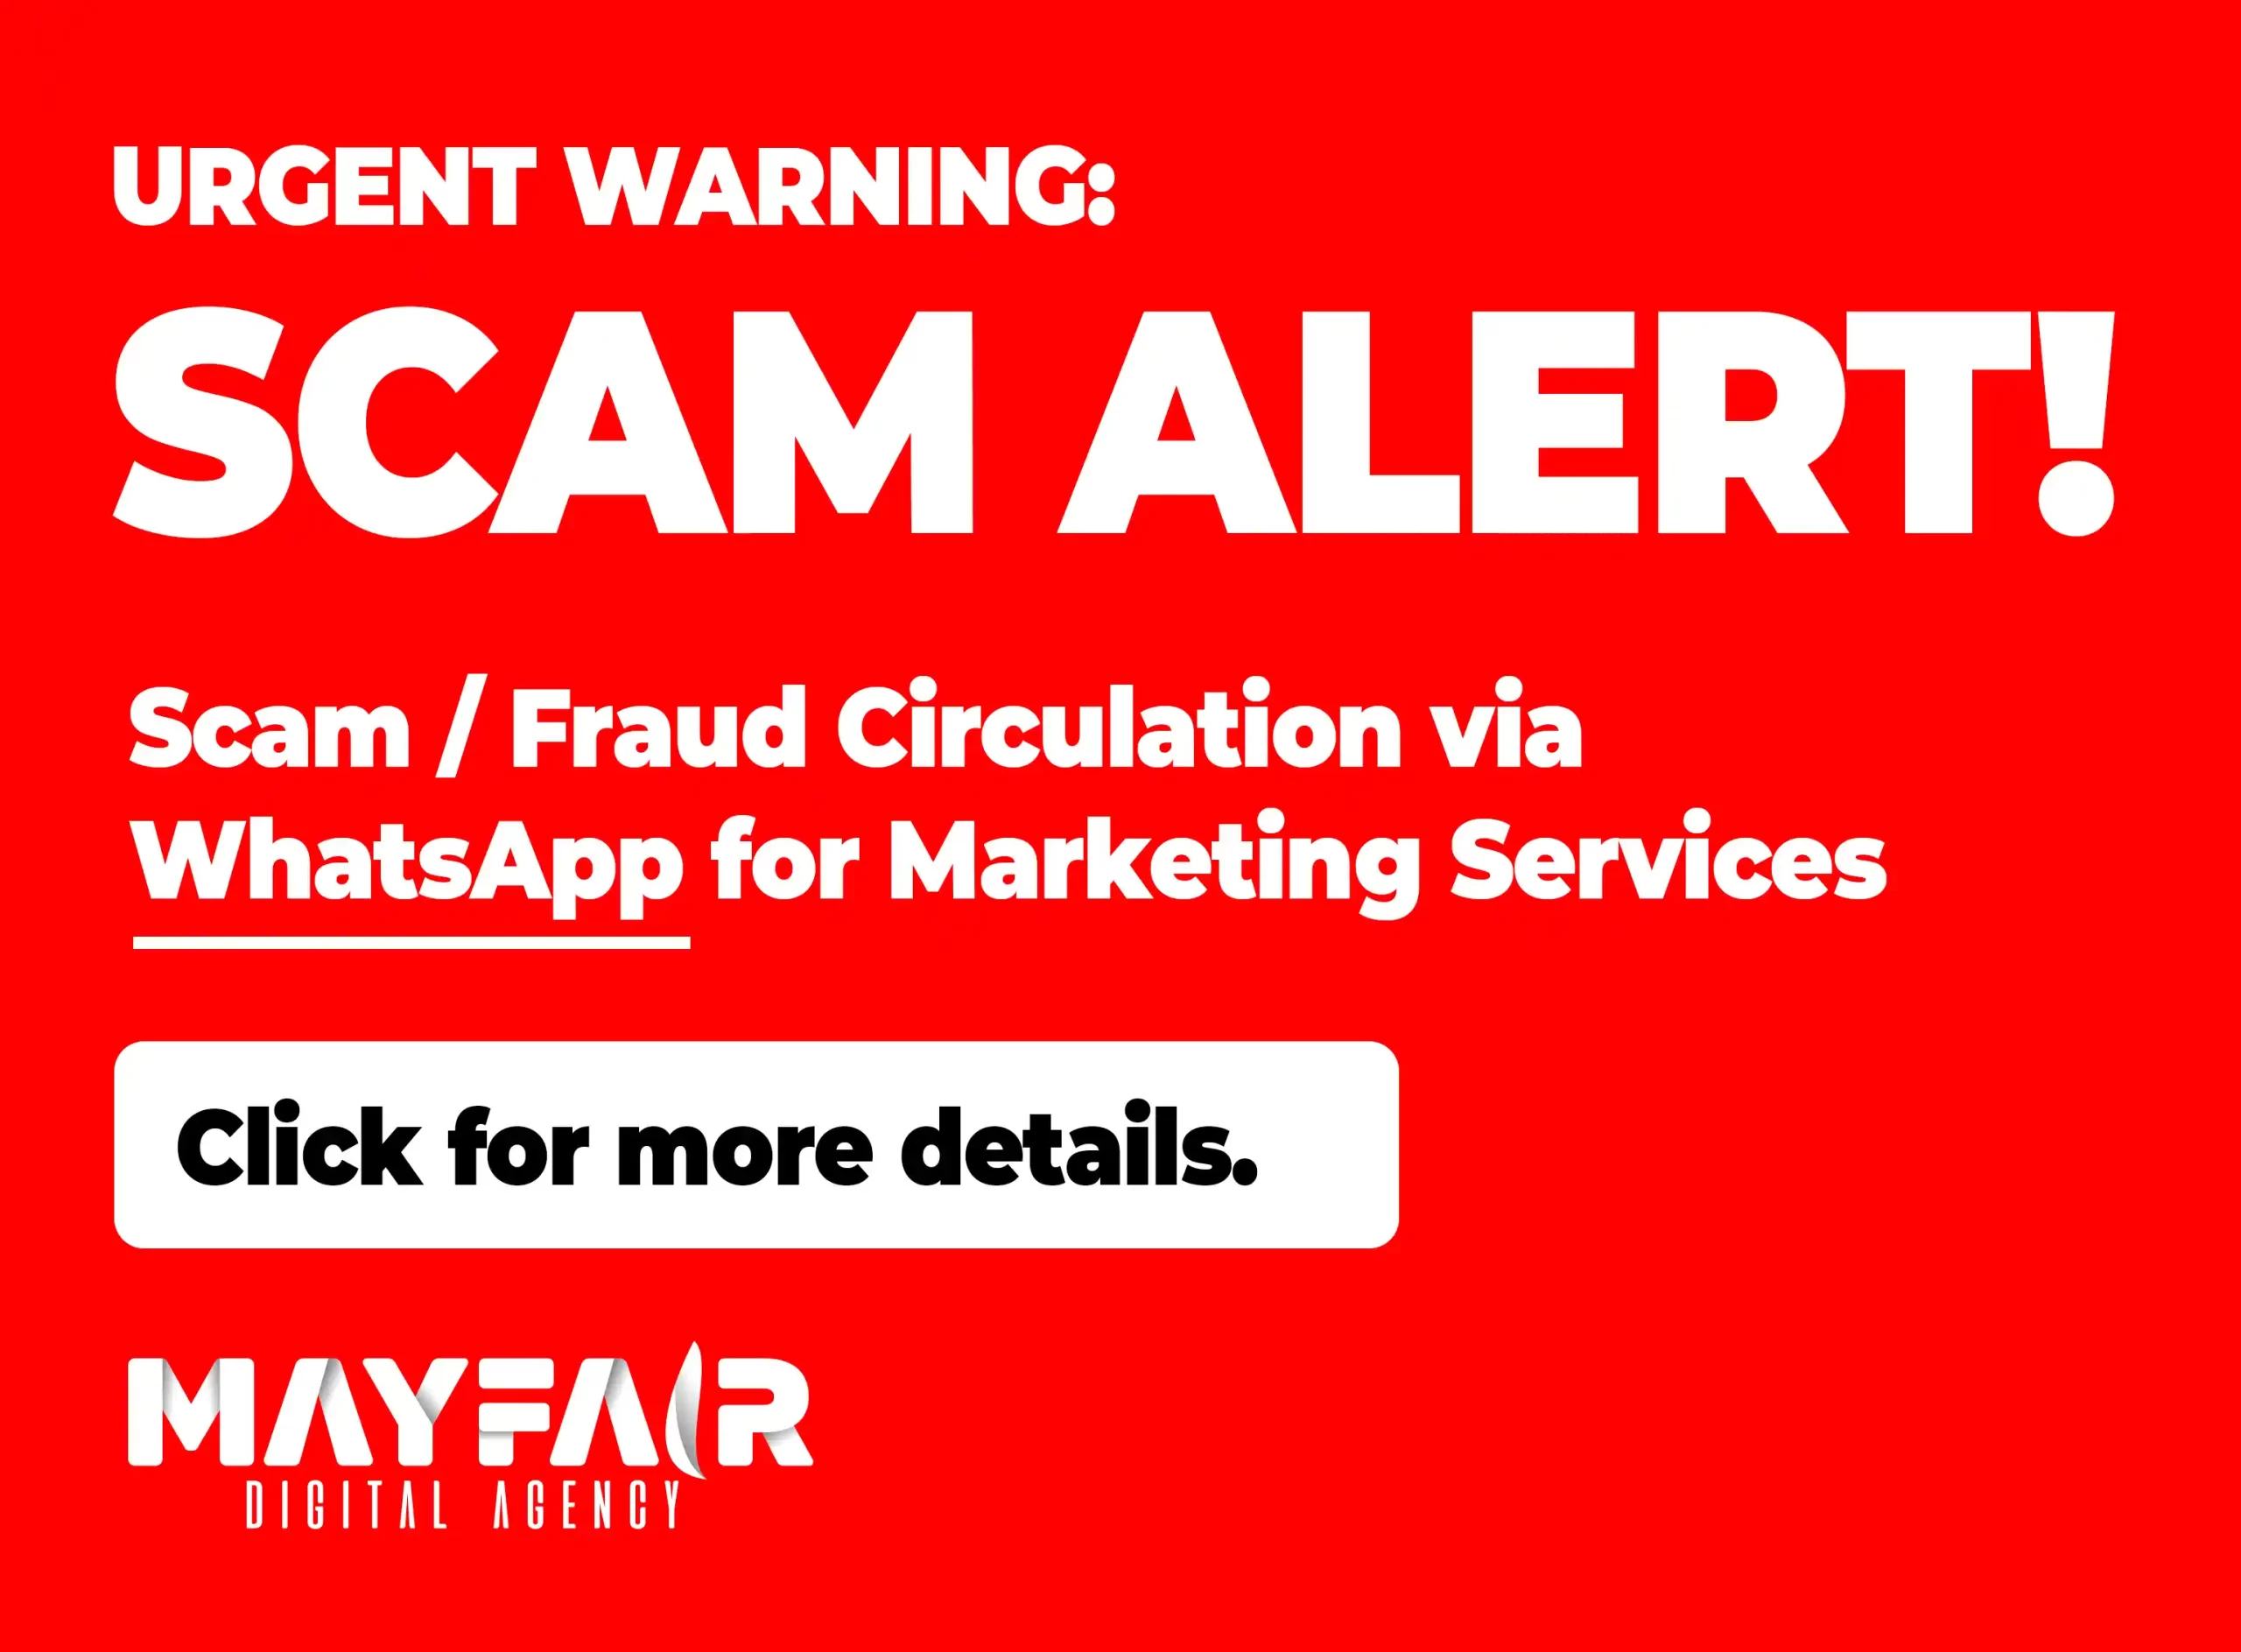 Public Service Announcement: Unauthorized Use of Mayfair Digital Agency's Name in Fraudulent Recruitment Schemes